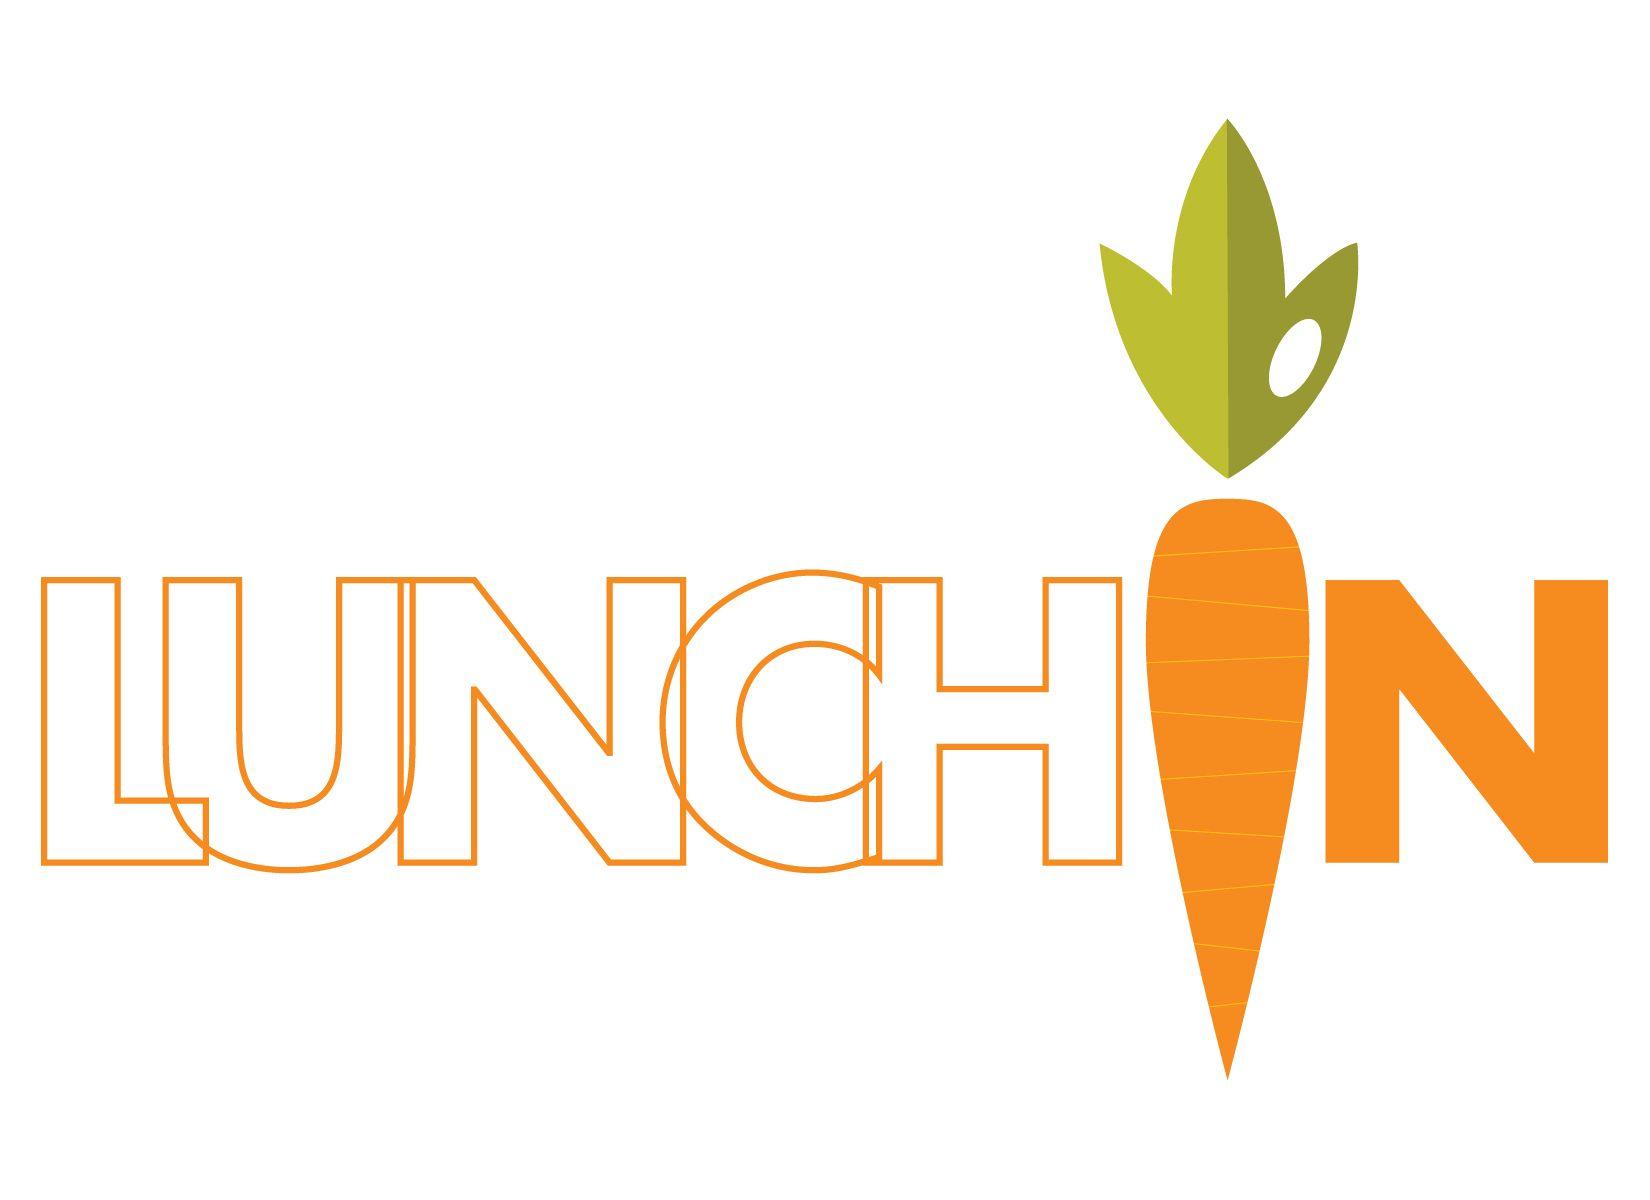 Lunch Logo - Lunch In logo. Advocates for Health in Action